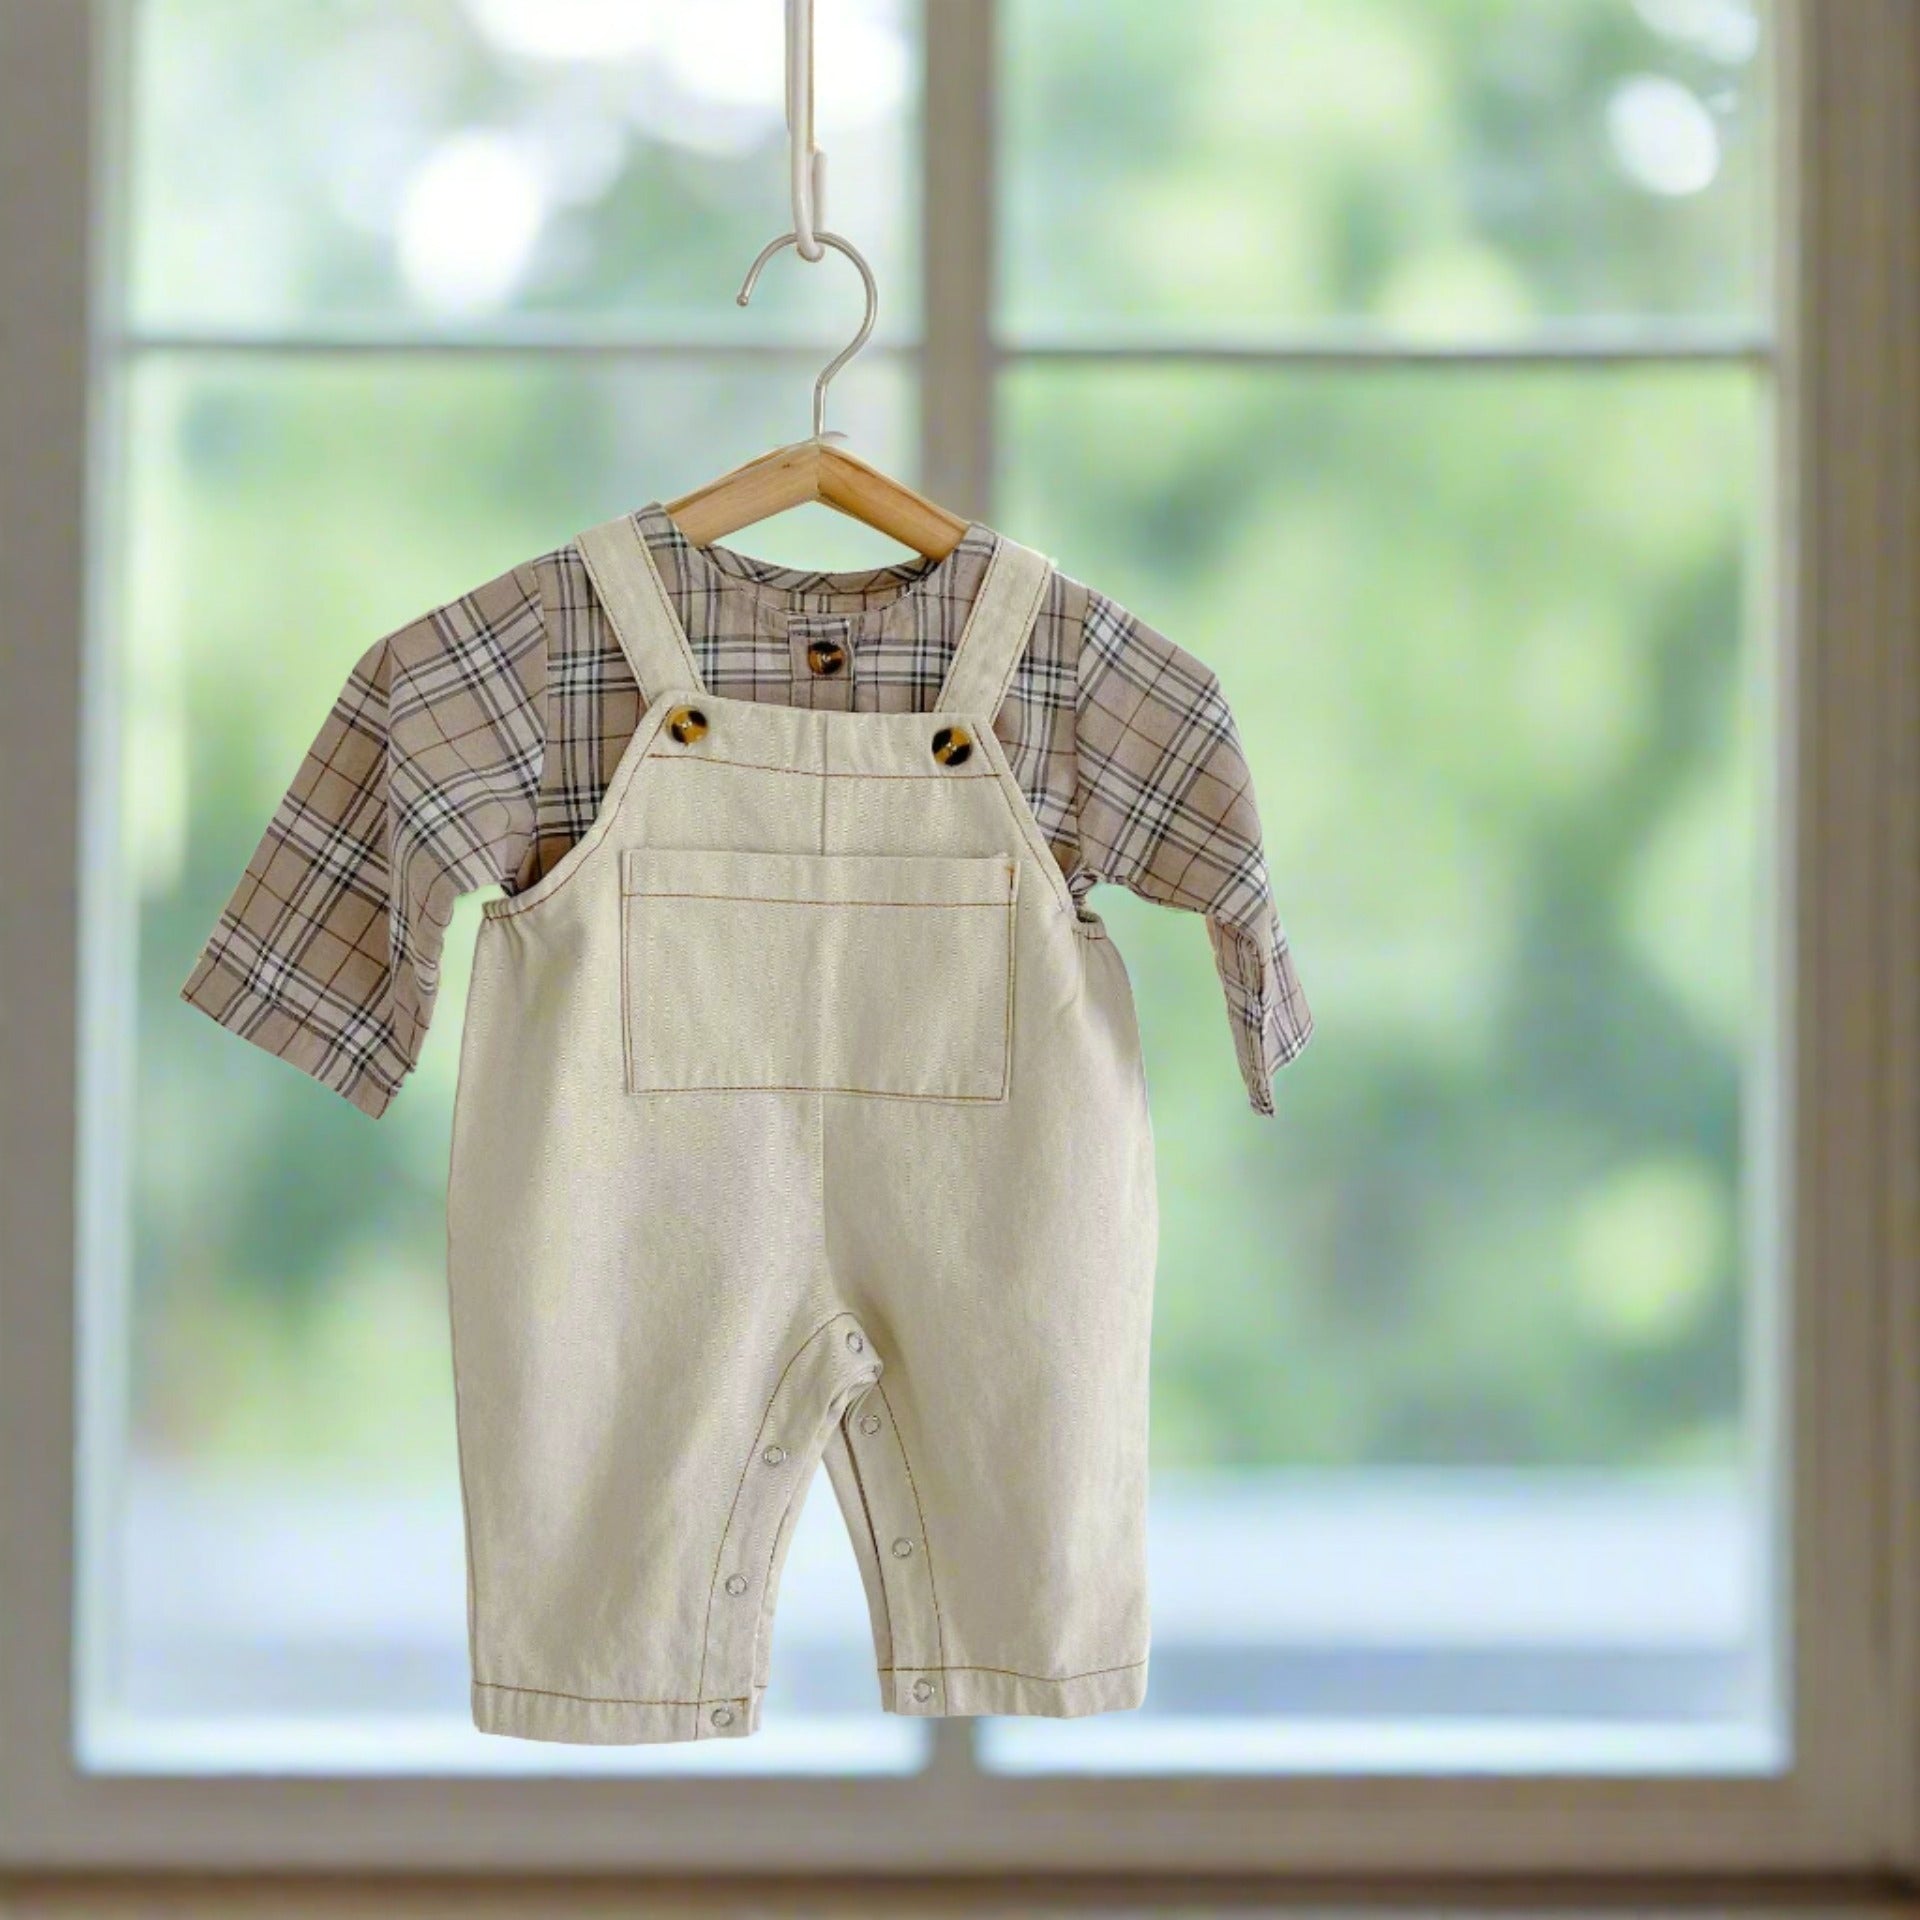 Baby Plaid Top and Denim Overalls - 100% cotton - Beige plaid pattern - Unisex for 1-3 years - Comfortable and stylish